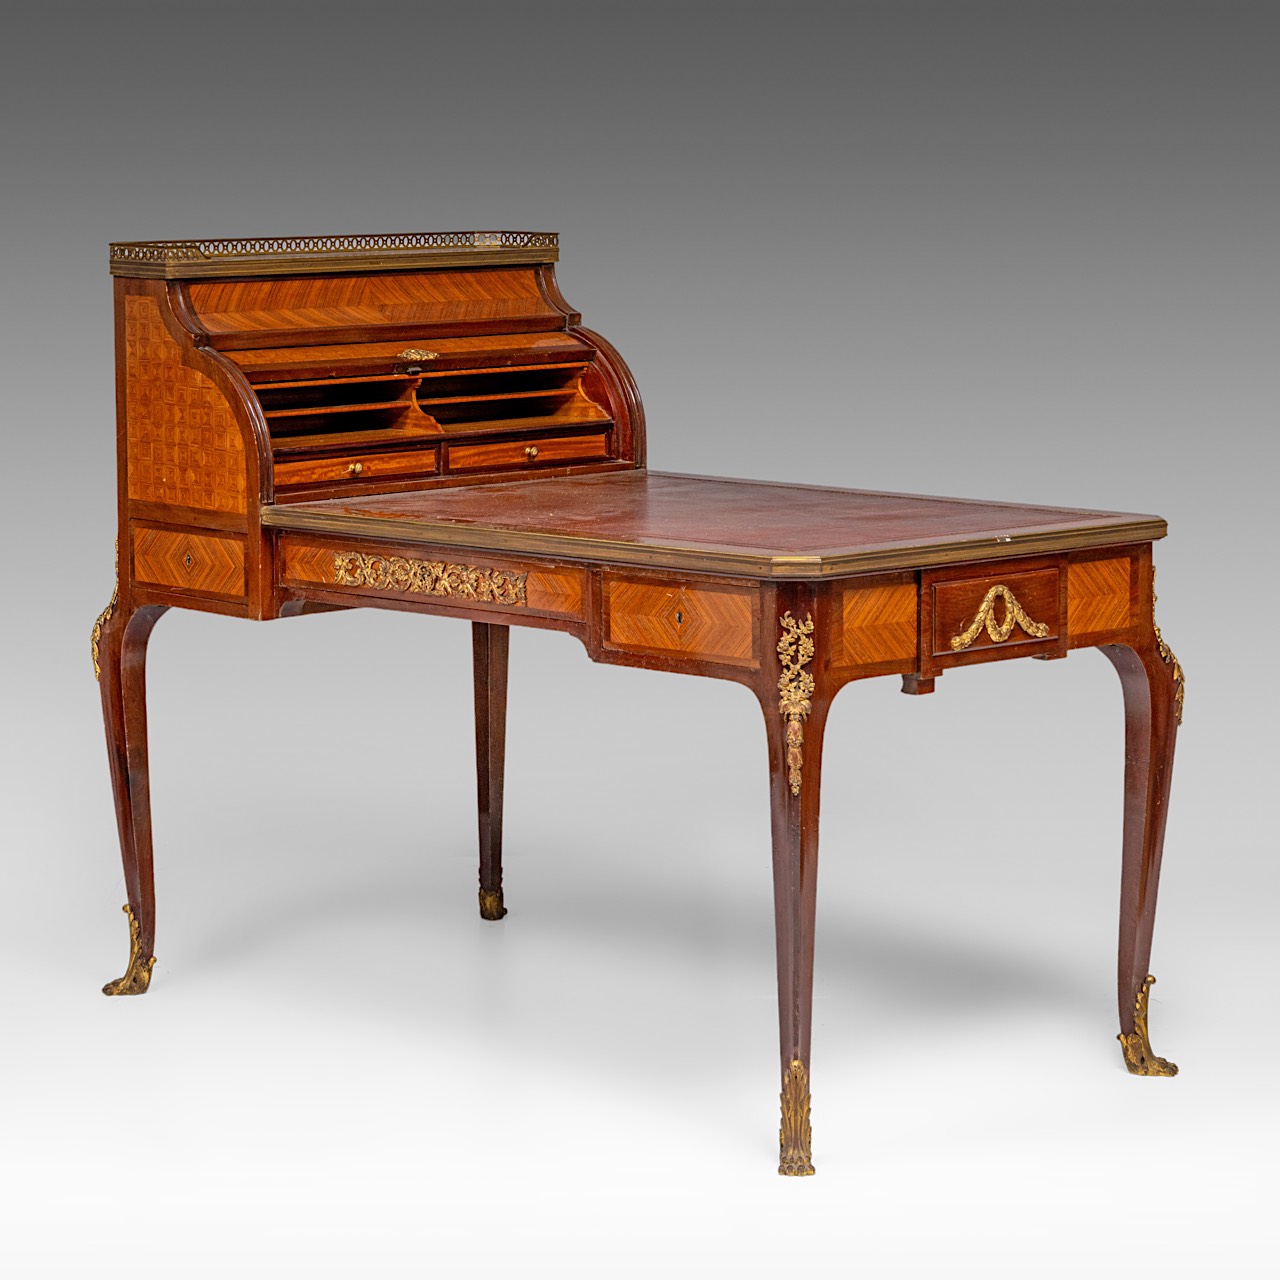 A leather-topped Transitional-style bureau plat and rolltop desk with parquetry and gilt bronze moun - Image 2 of 9